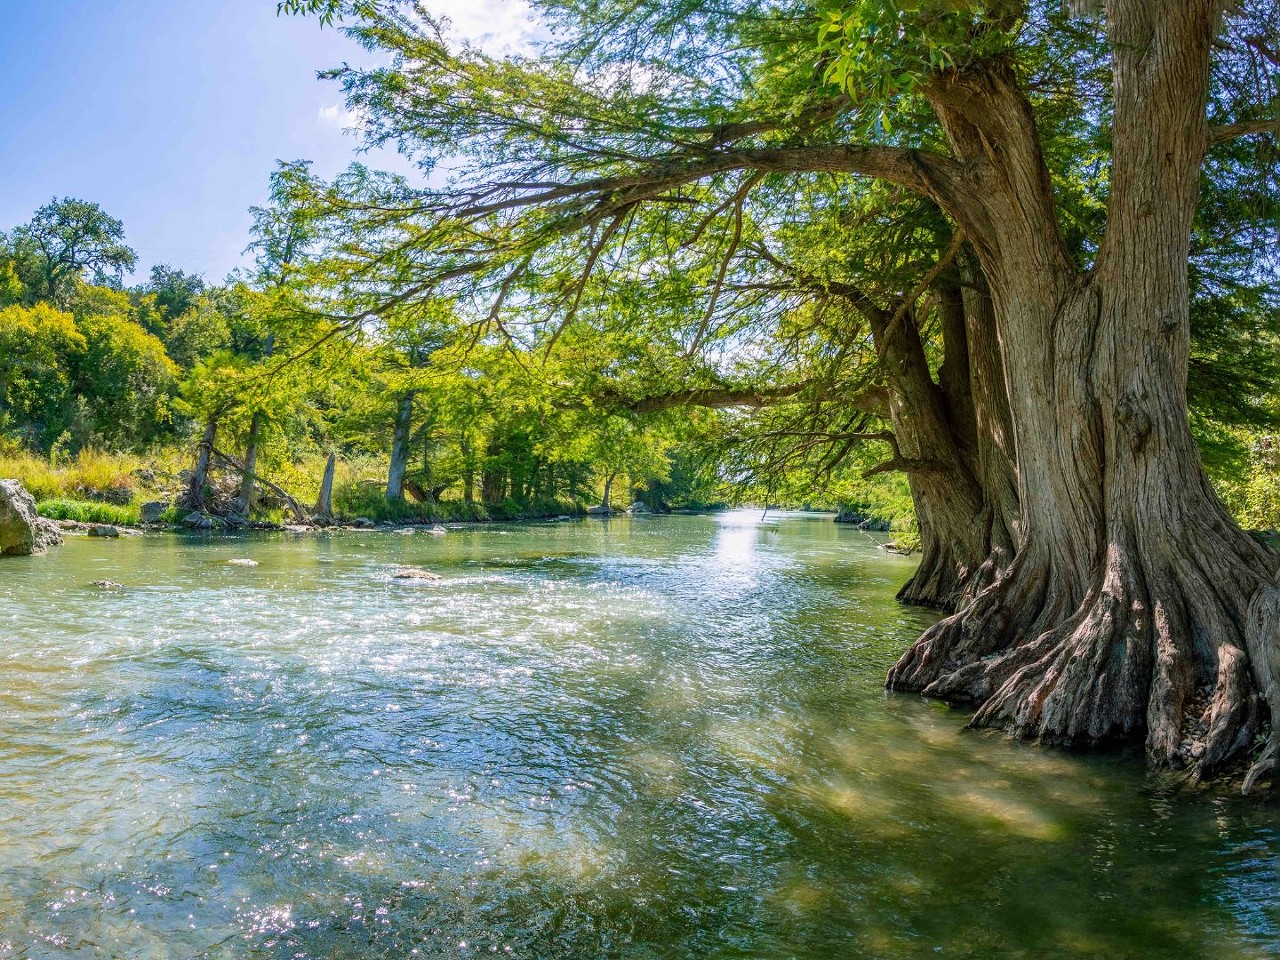 Guadalupe River State Park
3350 Park Road 31, Spring Branch, (830) 438-2656, tpwd.texas.gov
Swim, tube, canoe or fish — or do all four! With four miles of river frontage, Guadalupe State Park is sure to make for a full day.